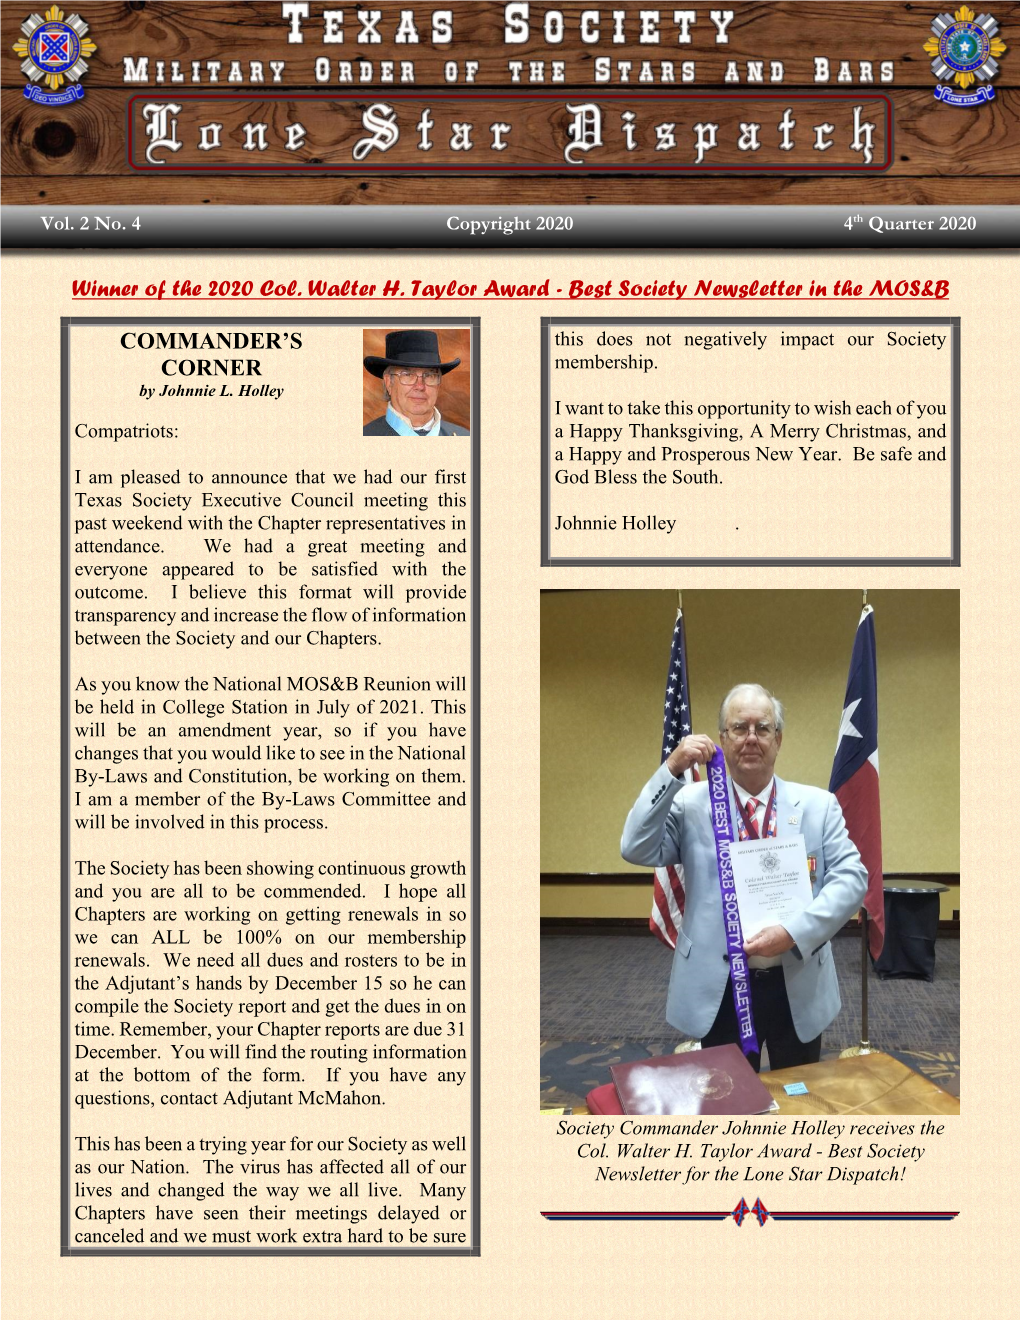 Winner of the 2020 Col. Walter H. Taylor Award - Best Society Newsletter in the MOS&B